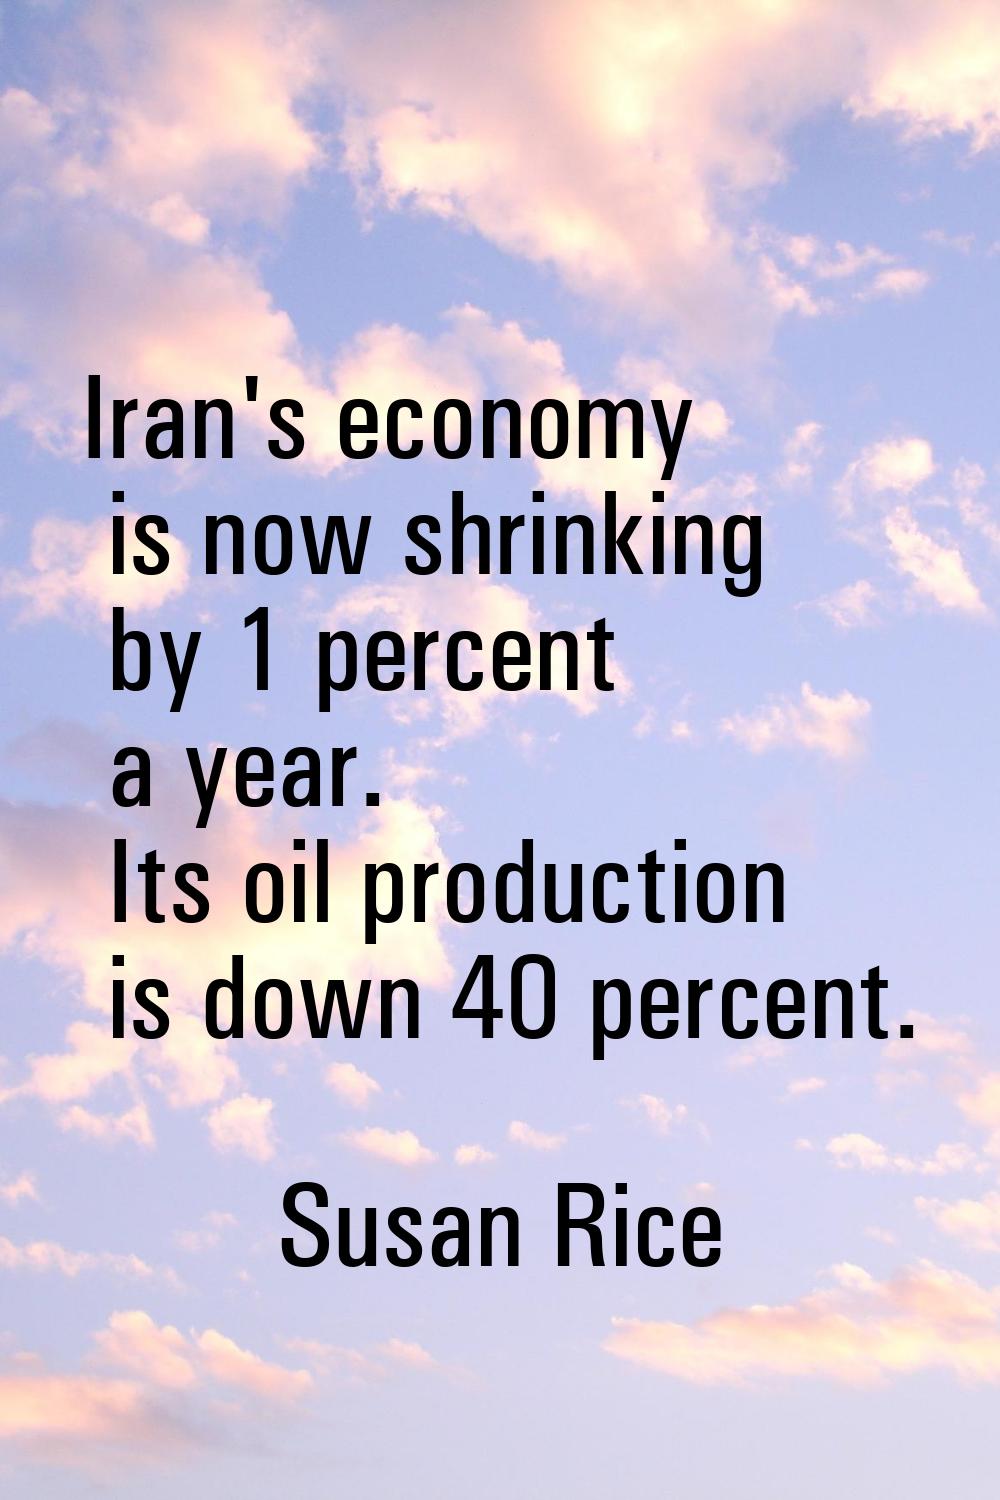 Iran's economy is now shrinking by 1 percent a year. Its oil production is down 40 percent.